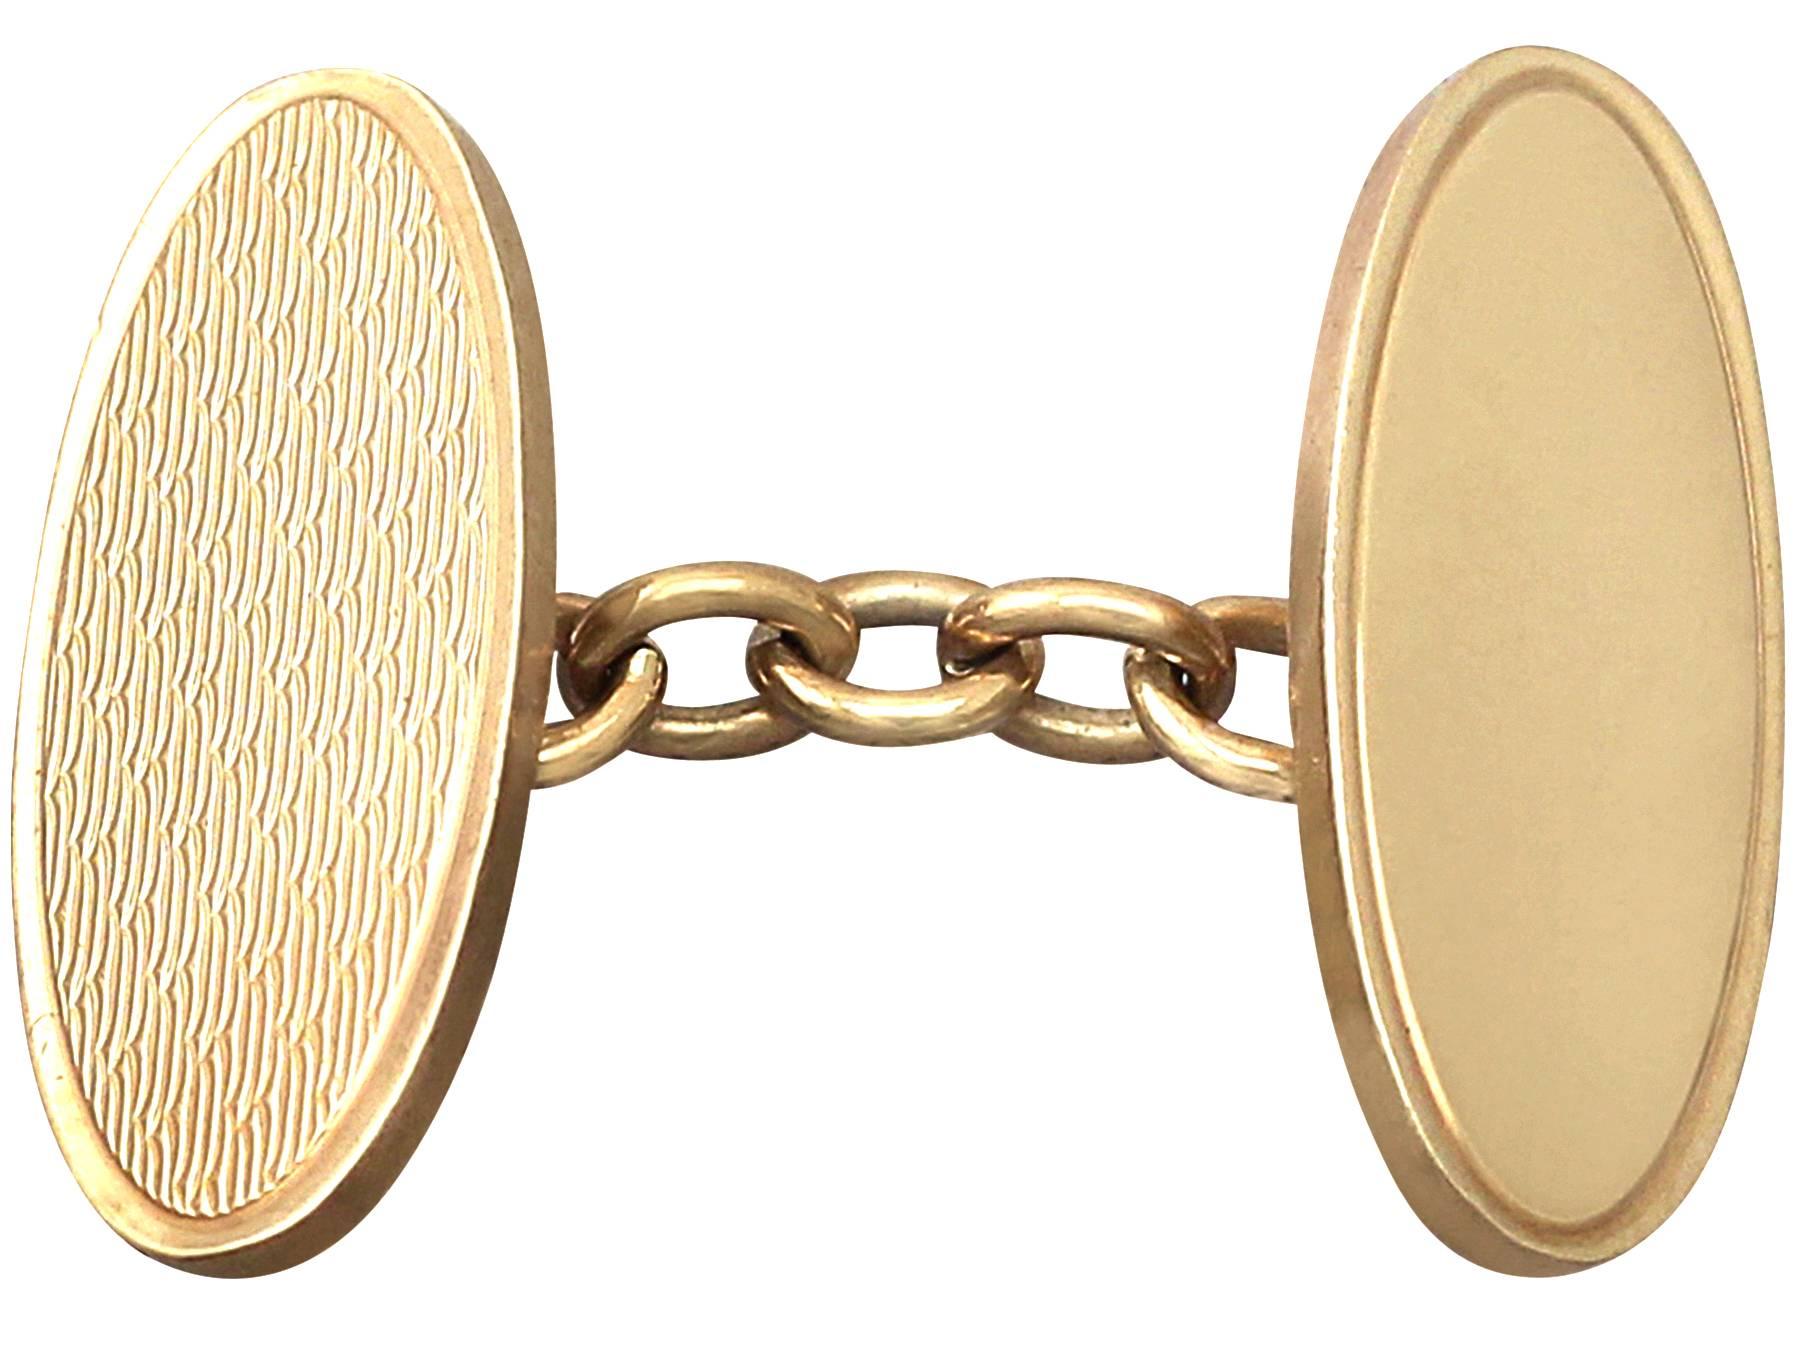 An exceptional, fine and impressive pair of vintage English 9 karat yellow gold cufflinks; part of our diverse men's jewelry and estate jewelry collections

These exceptional, fine and impressive vintage cufflinks have been crafted in 9k yellow